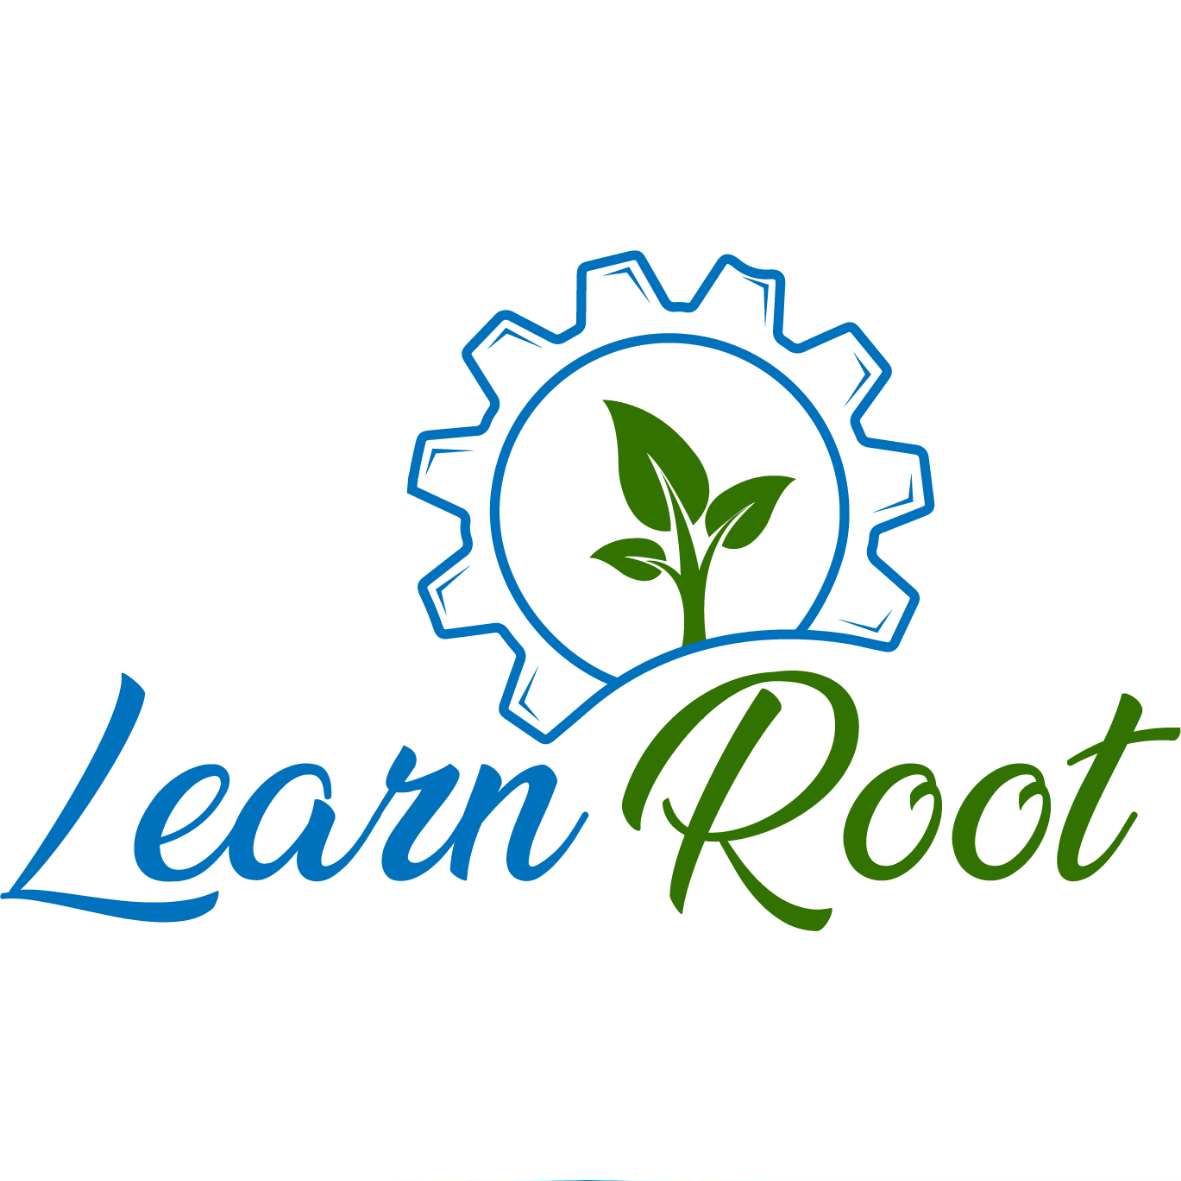 Www.learnroothk.comhttp